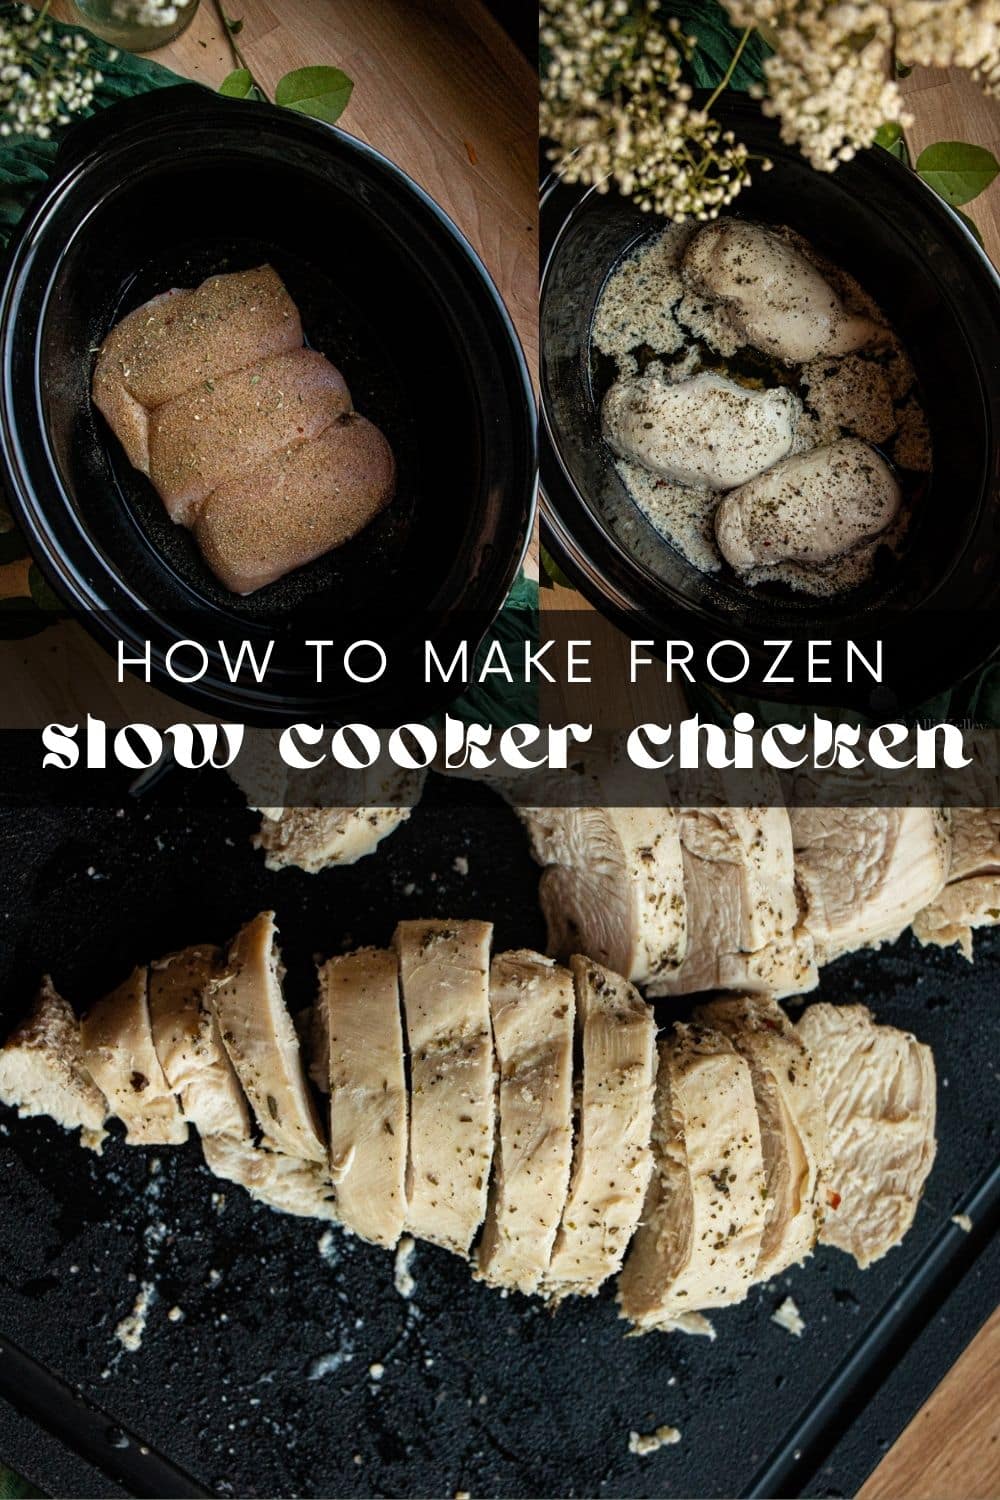 Slow cookers can be a great kitchen tool for busy days. After all, who doesn't want to come home to the smell of a tasty dinner ready and waiting? And while it's often thought that crockpots are only good for making stews and soups, they can actually do so much more – like cooking frozen chicken in slow cooker!